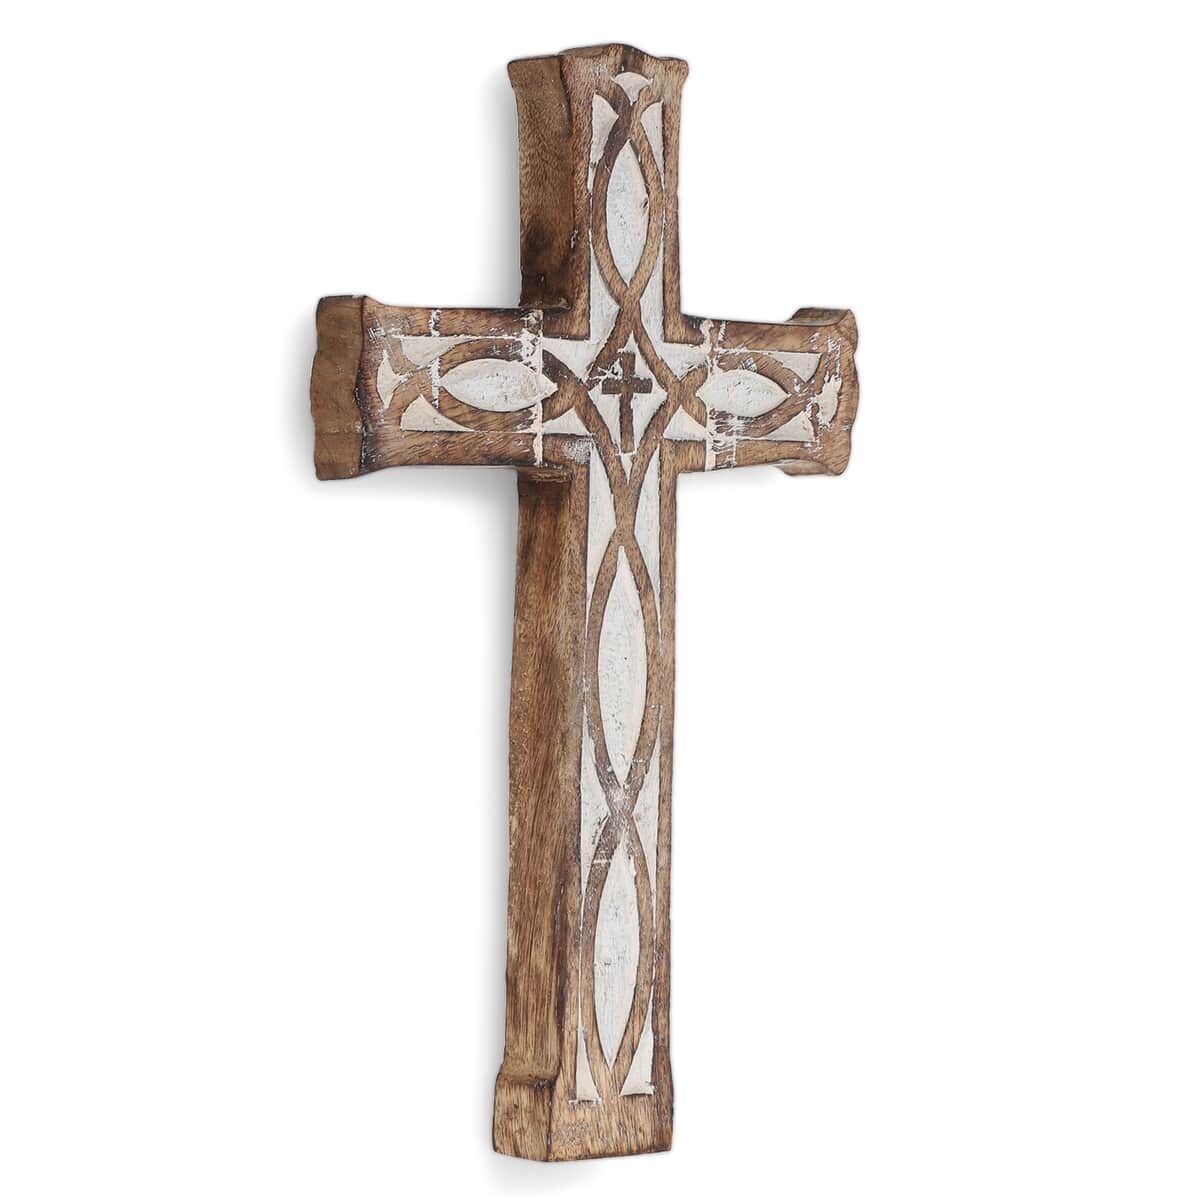 Nakkashi Brown Wooden Handcrafted Decorative Cross (7x12), Vintage Style Wall Hanging Handcarved Mango Wood Cross For Home Decor image number 4